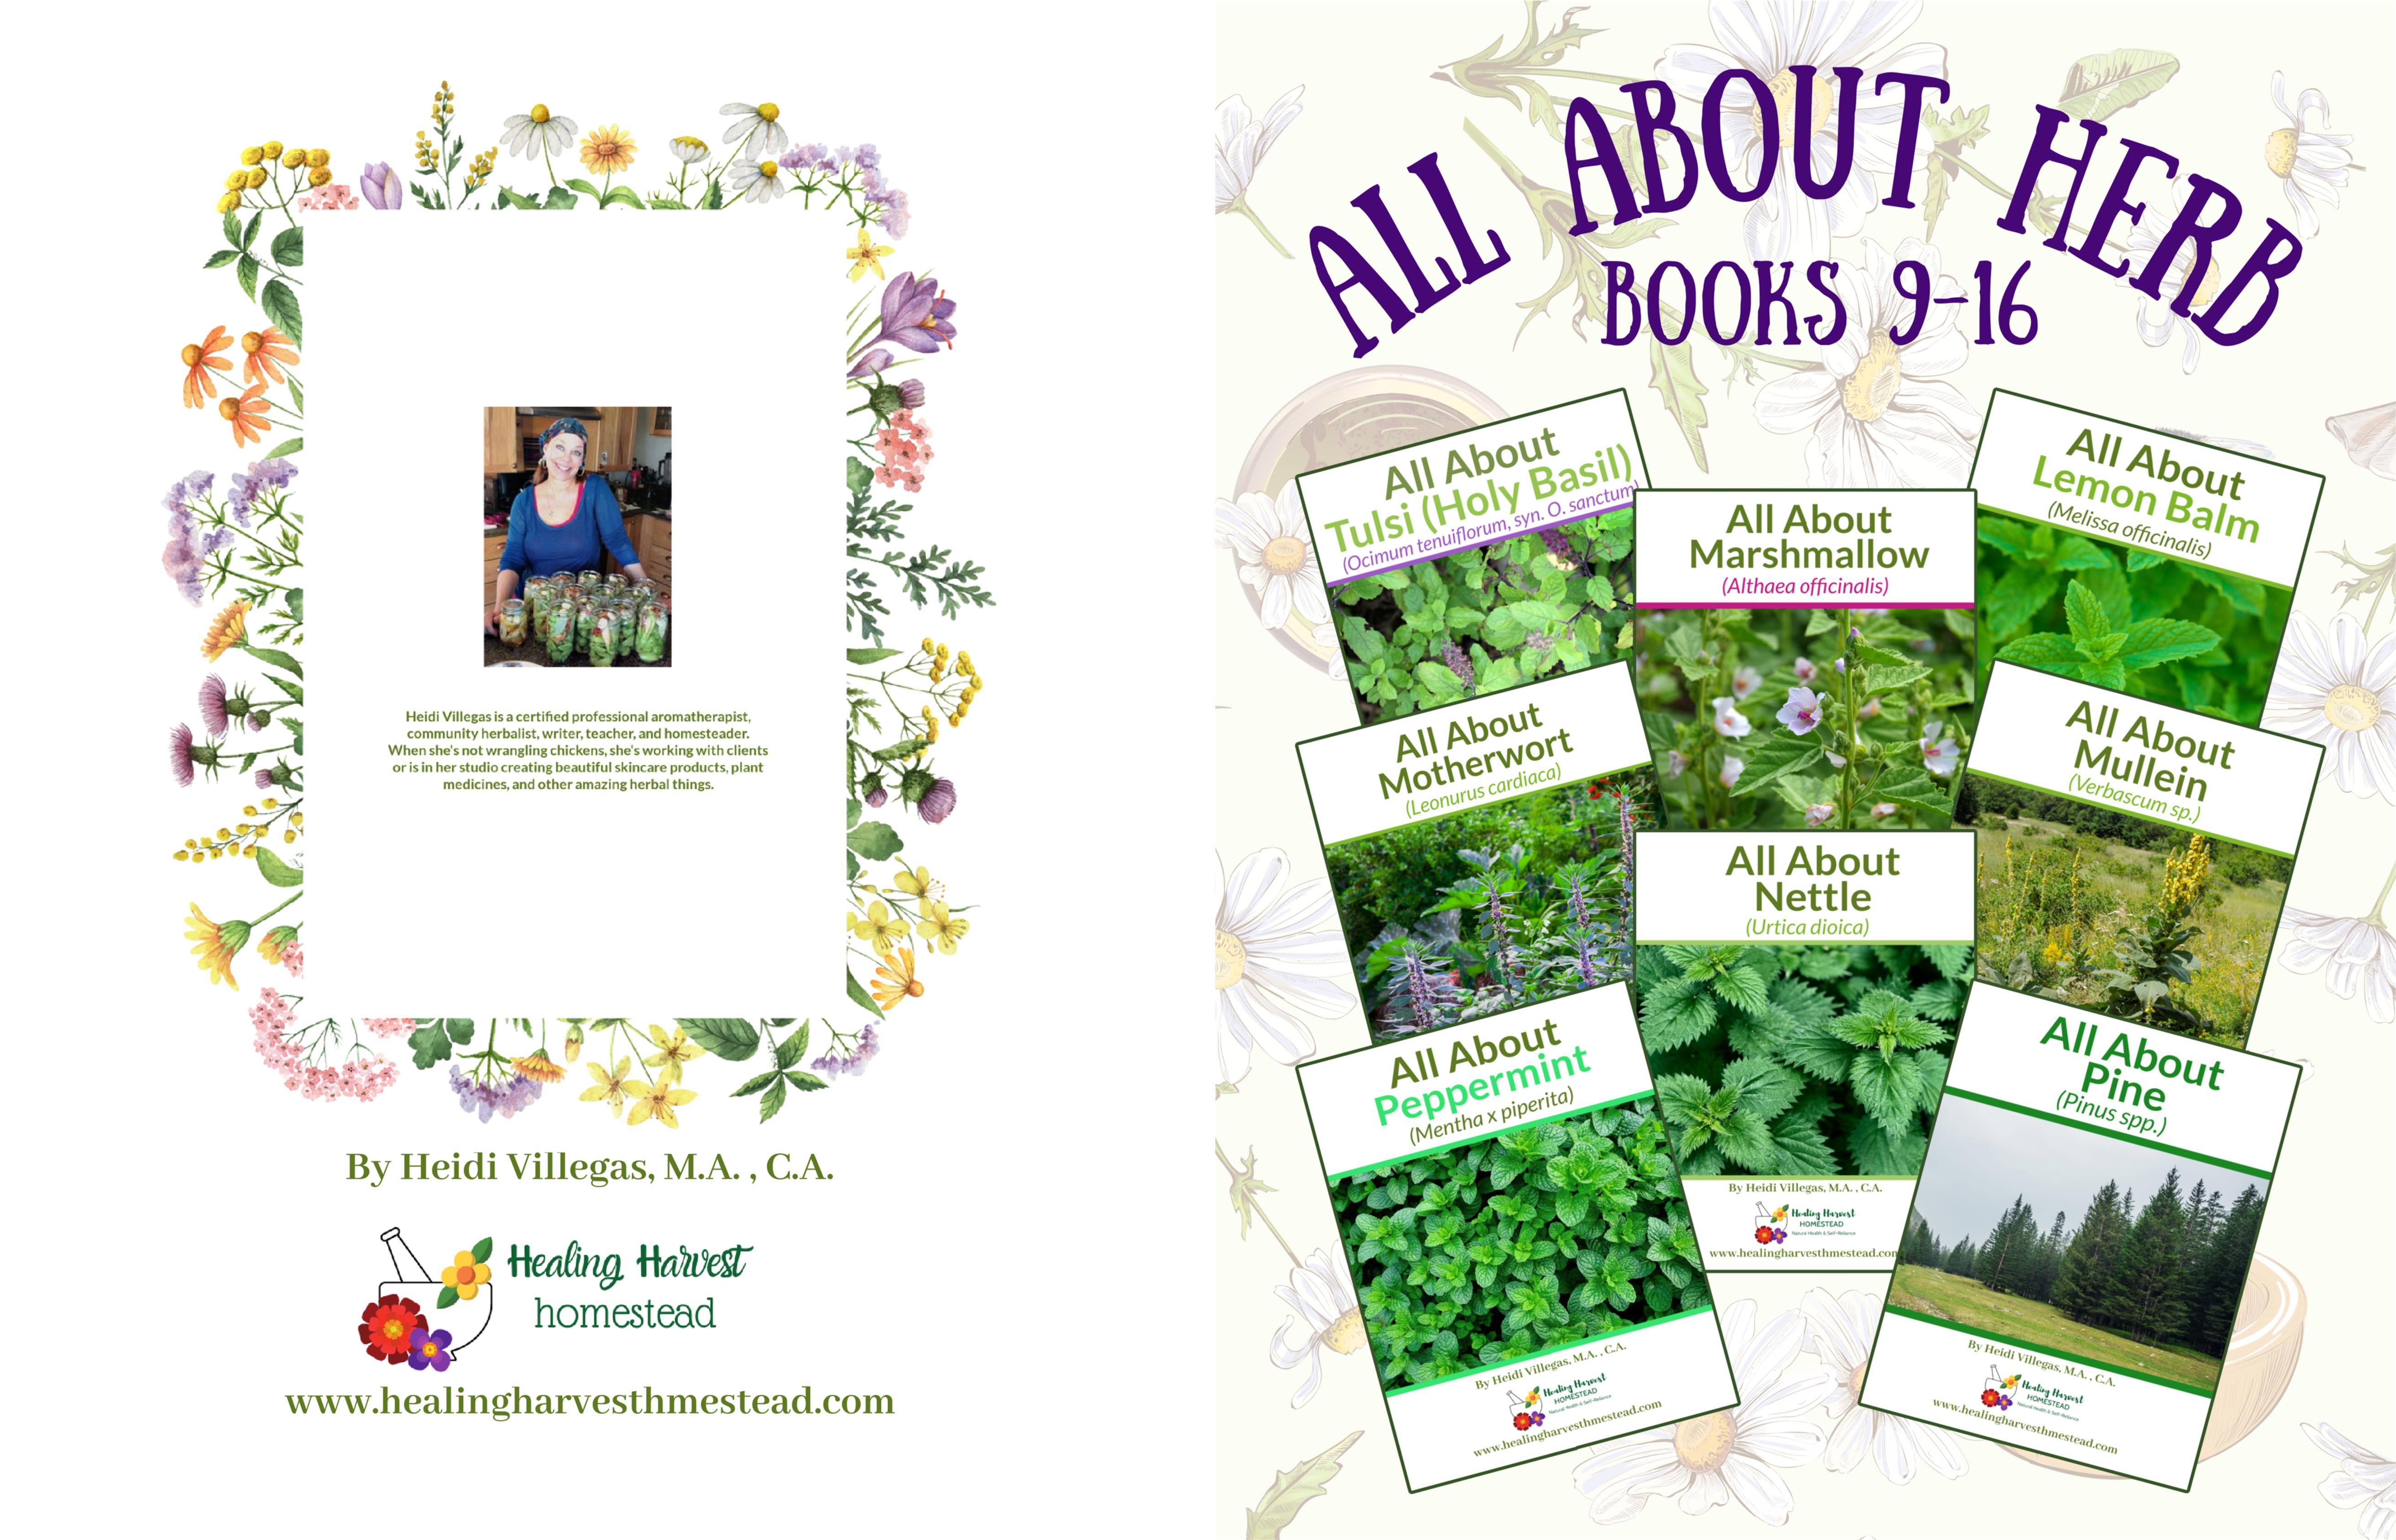  All About Herbs Books 9-16 cover image